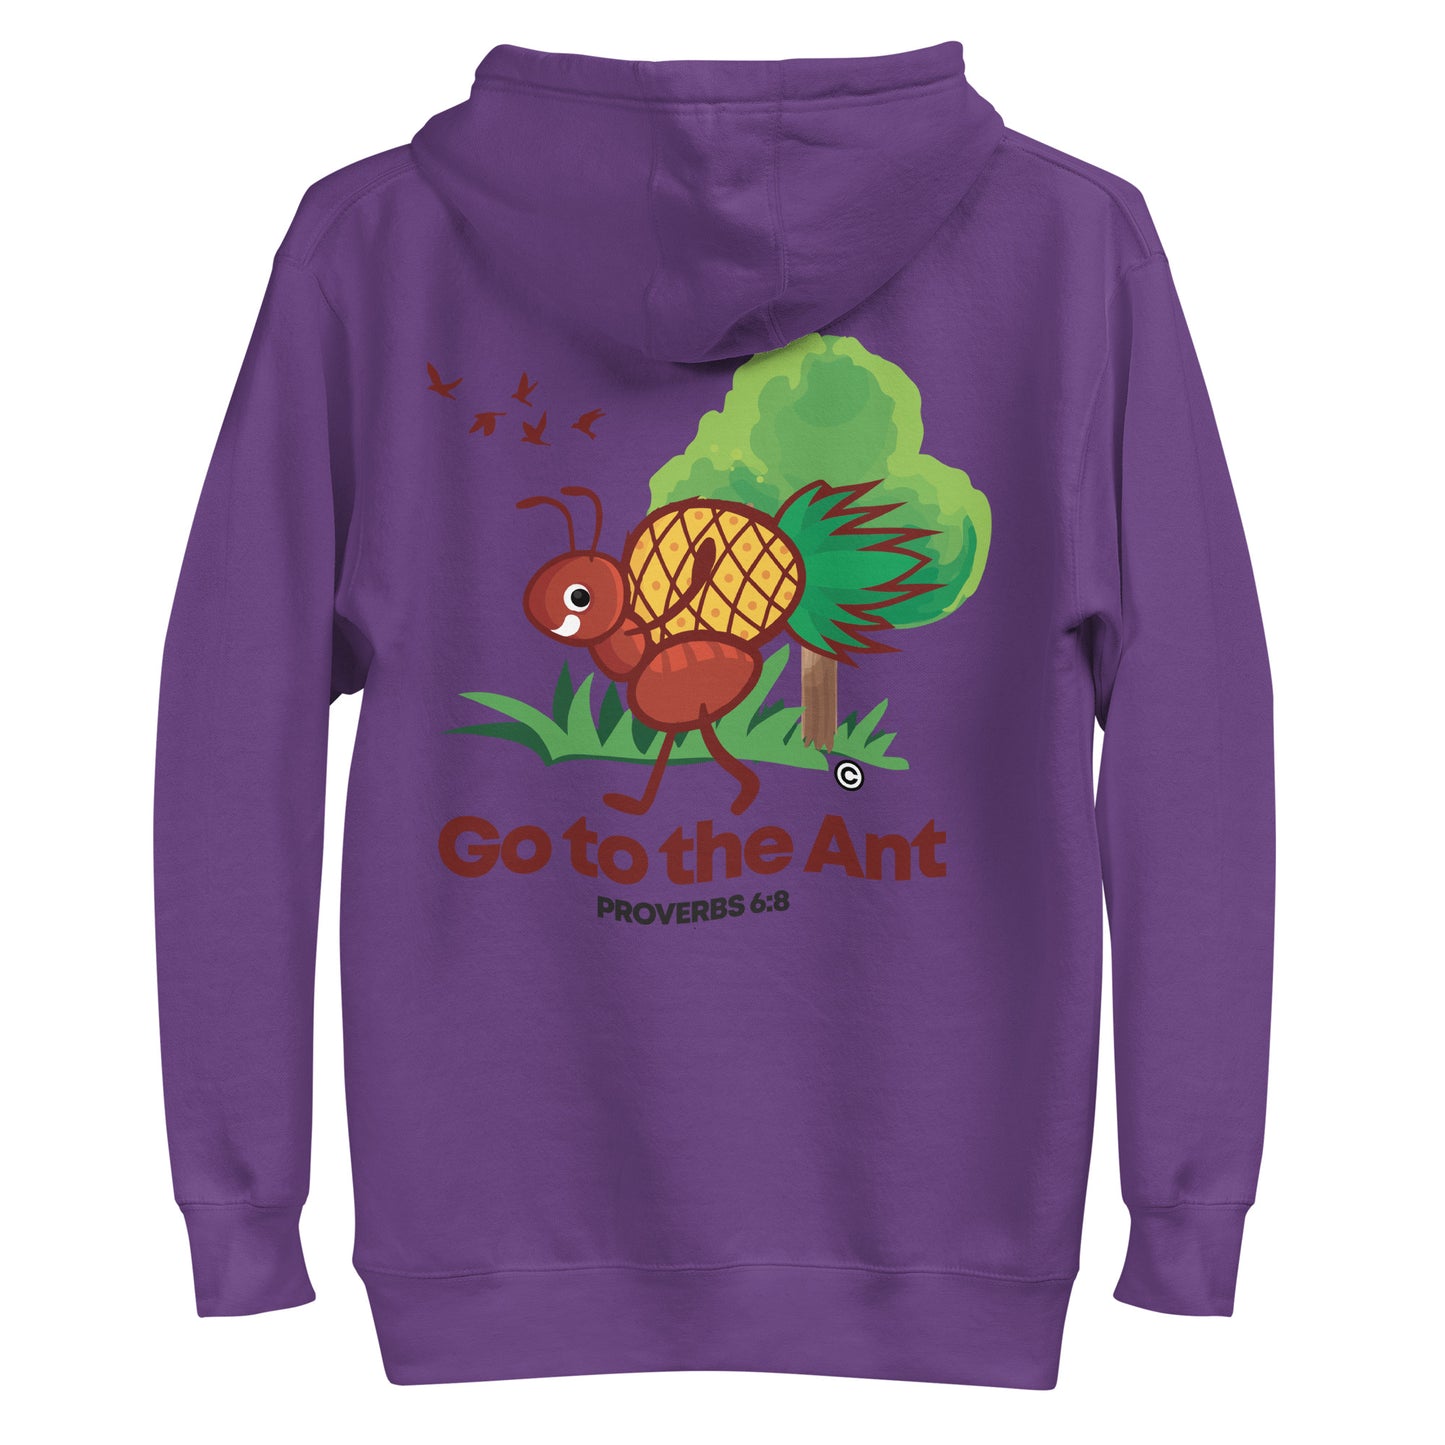 Go to the Ant Men's Hoodie